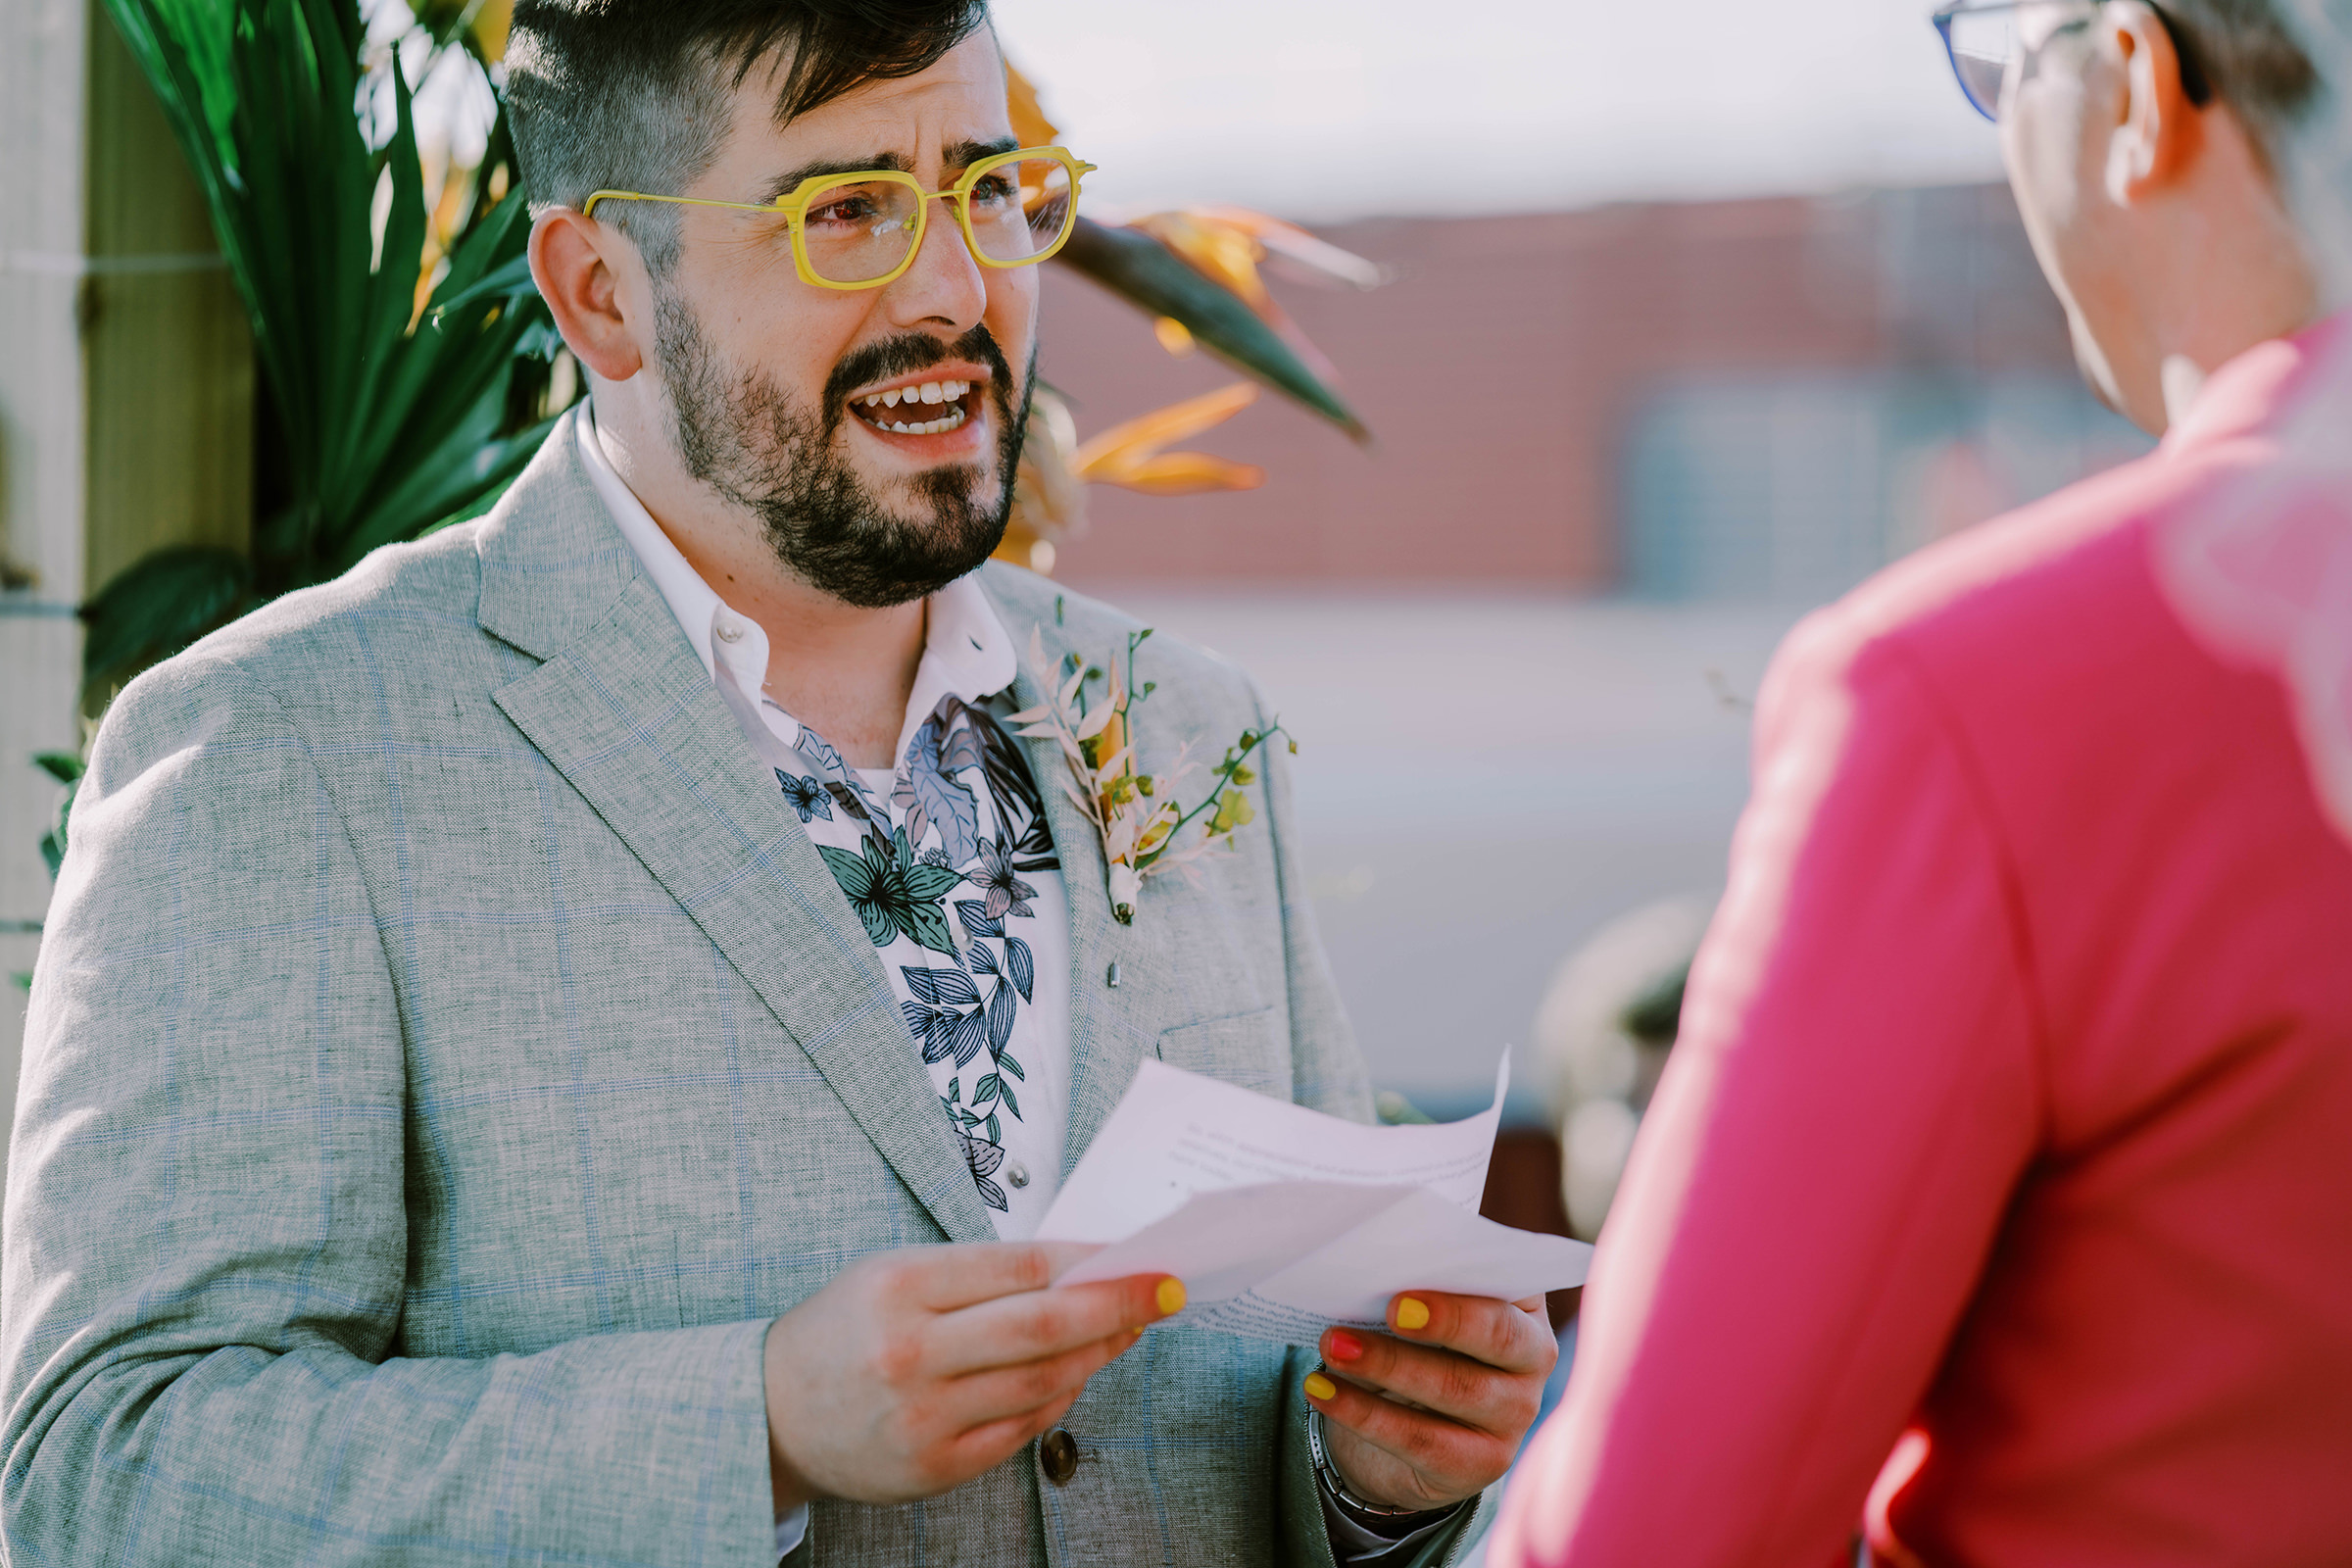 Joey says his vows to Dustin at their wedding on the Bell Harbor Conference Center rooftop, summer 2022